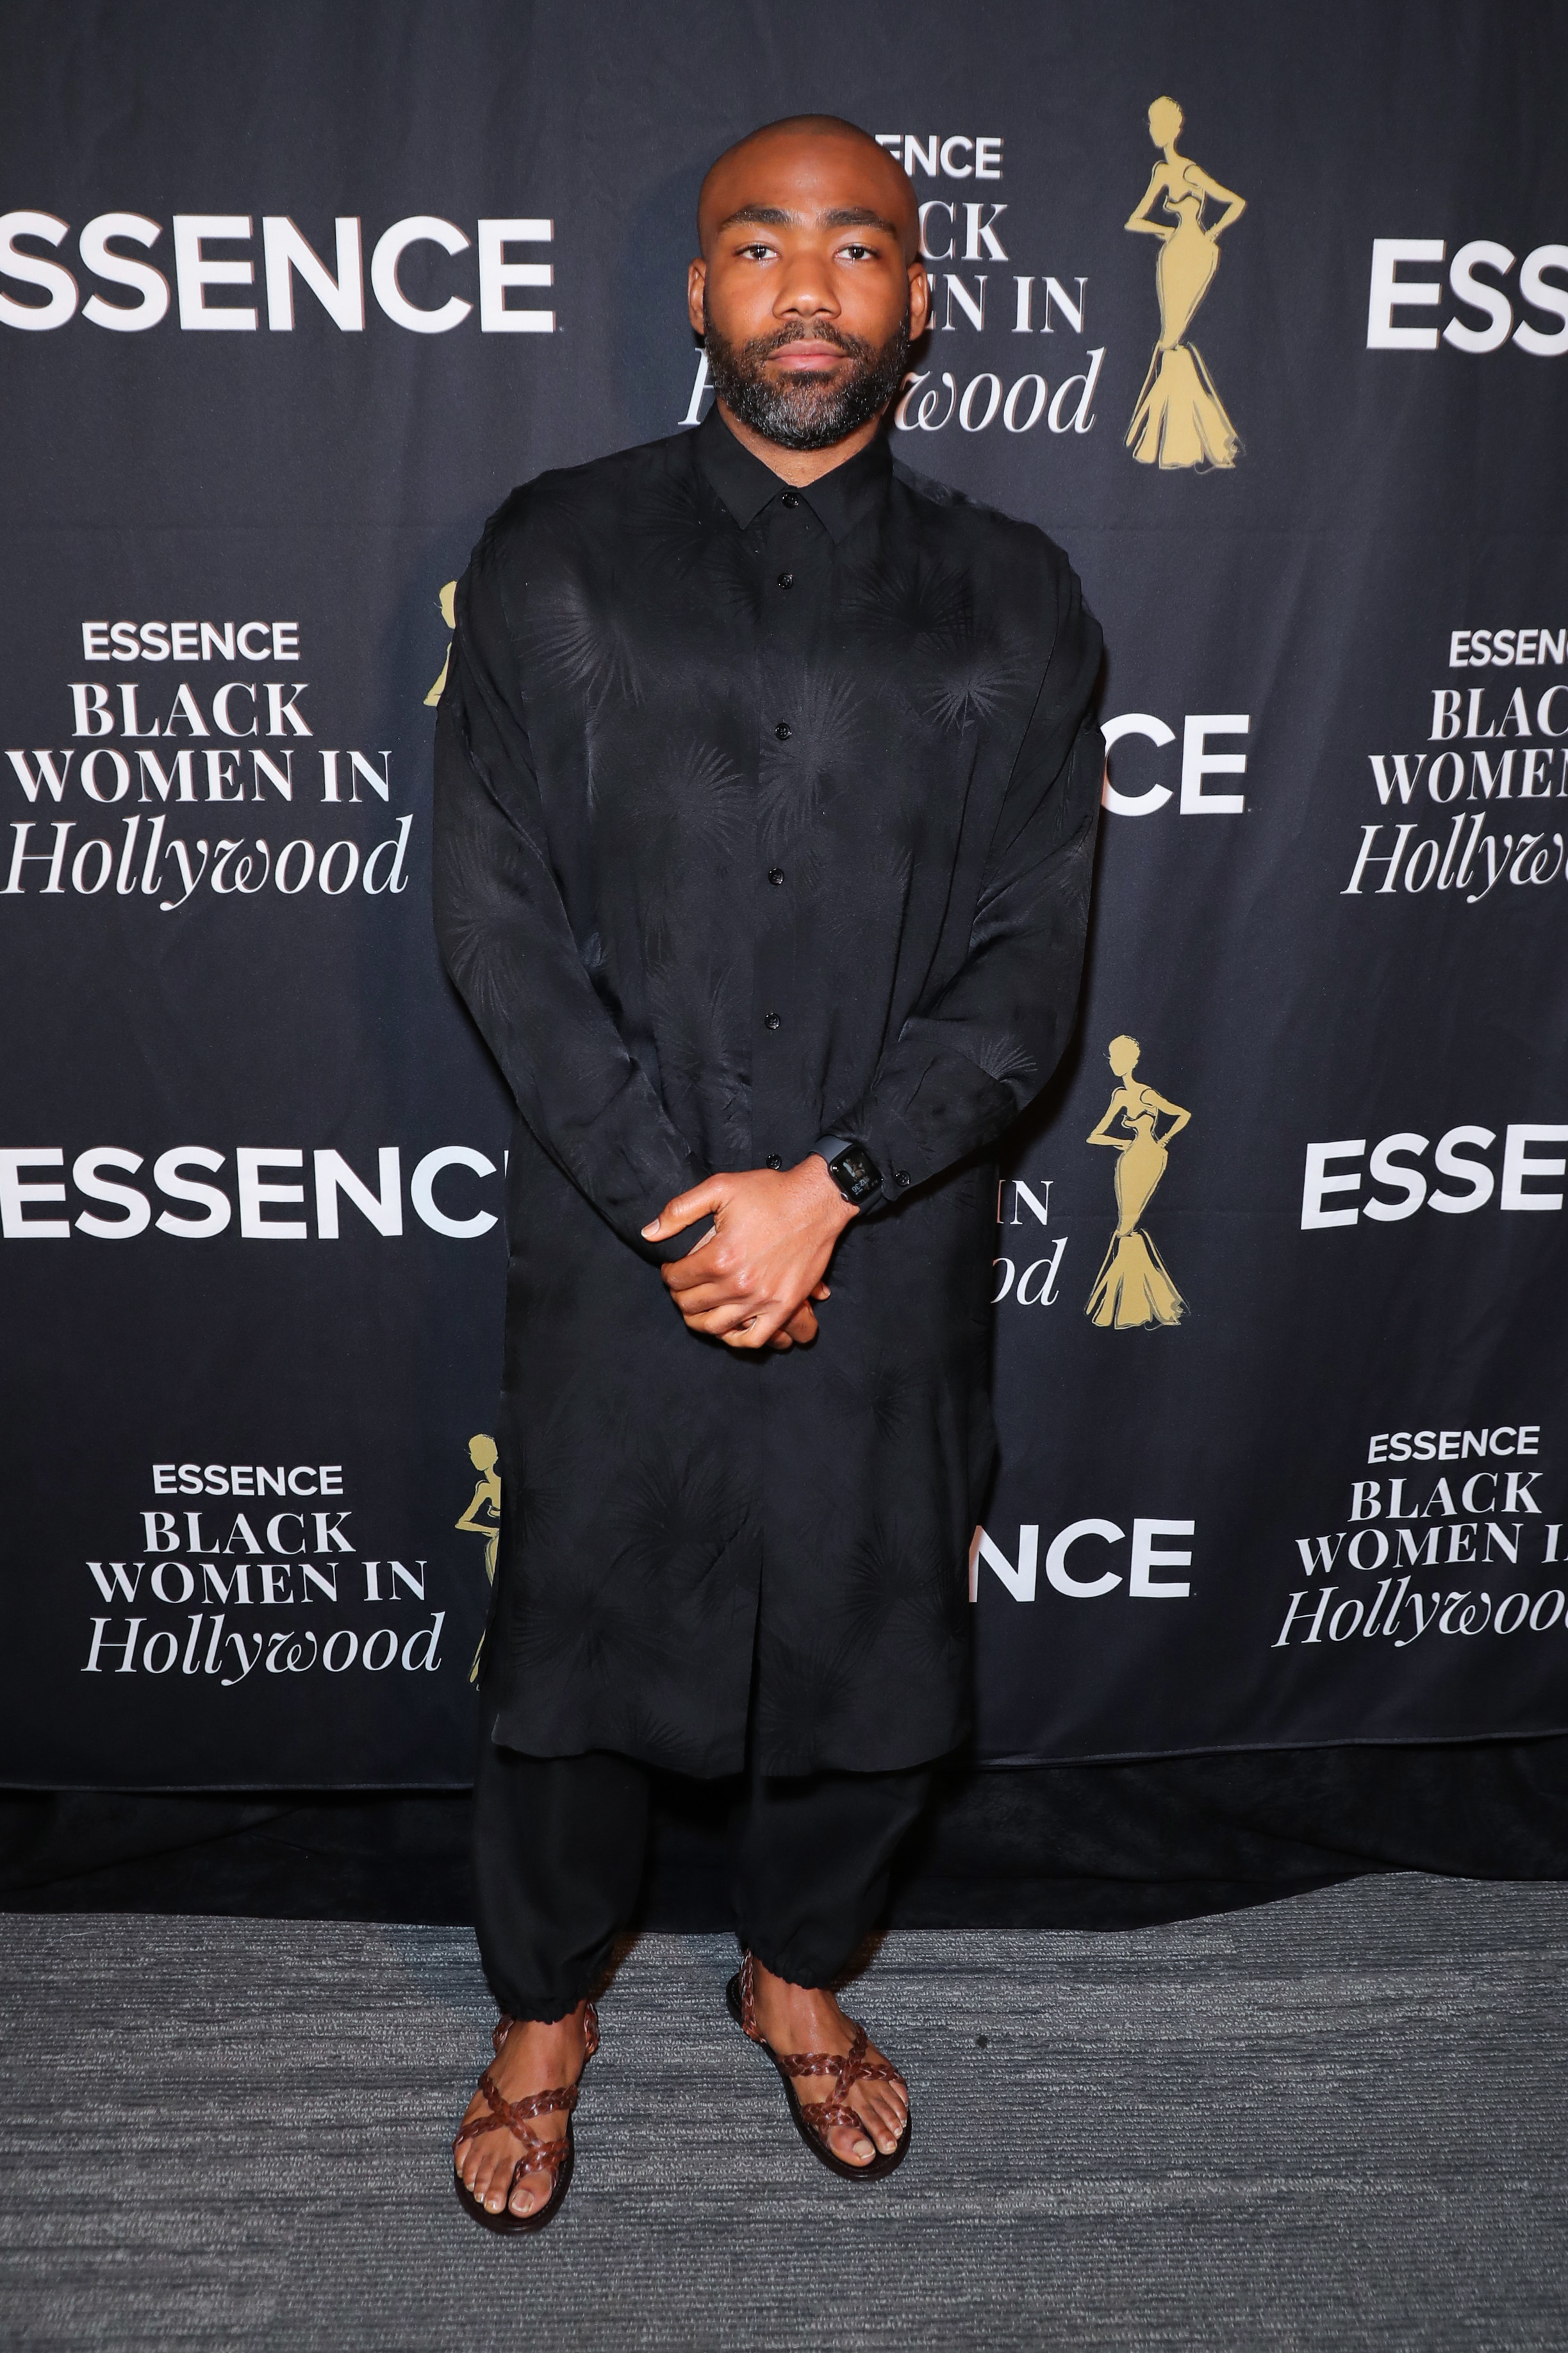 Donald Glover at the Essence Black Women in Hollywood event